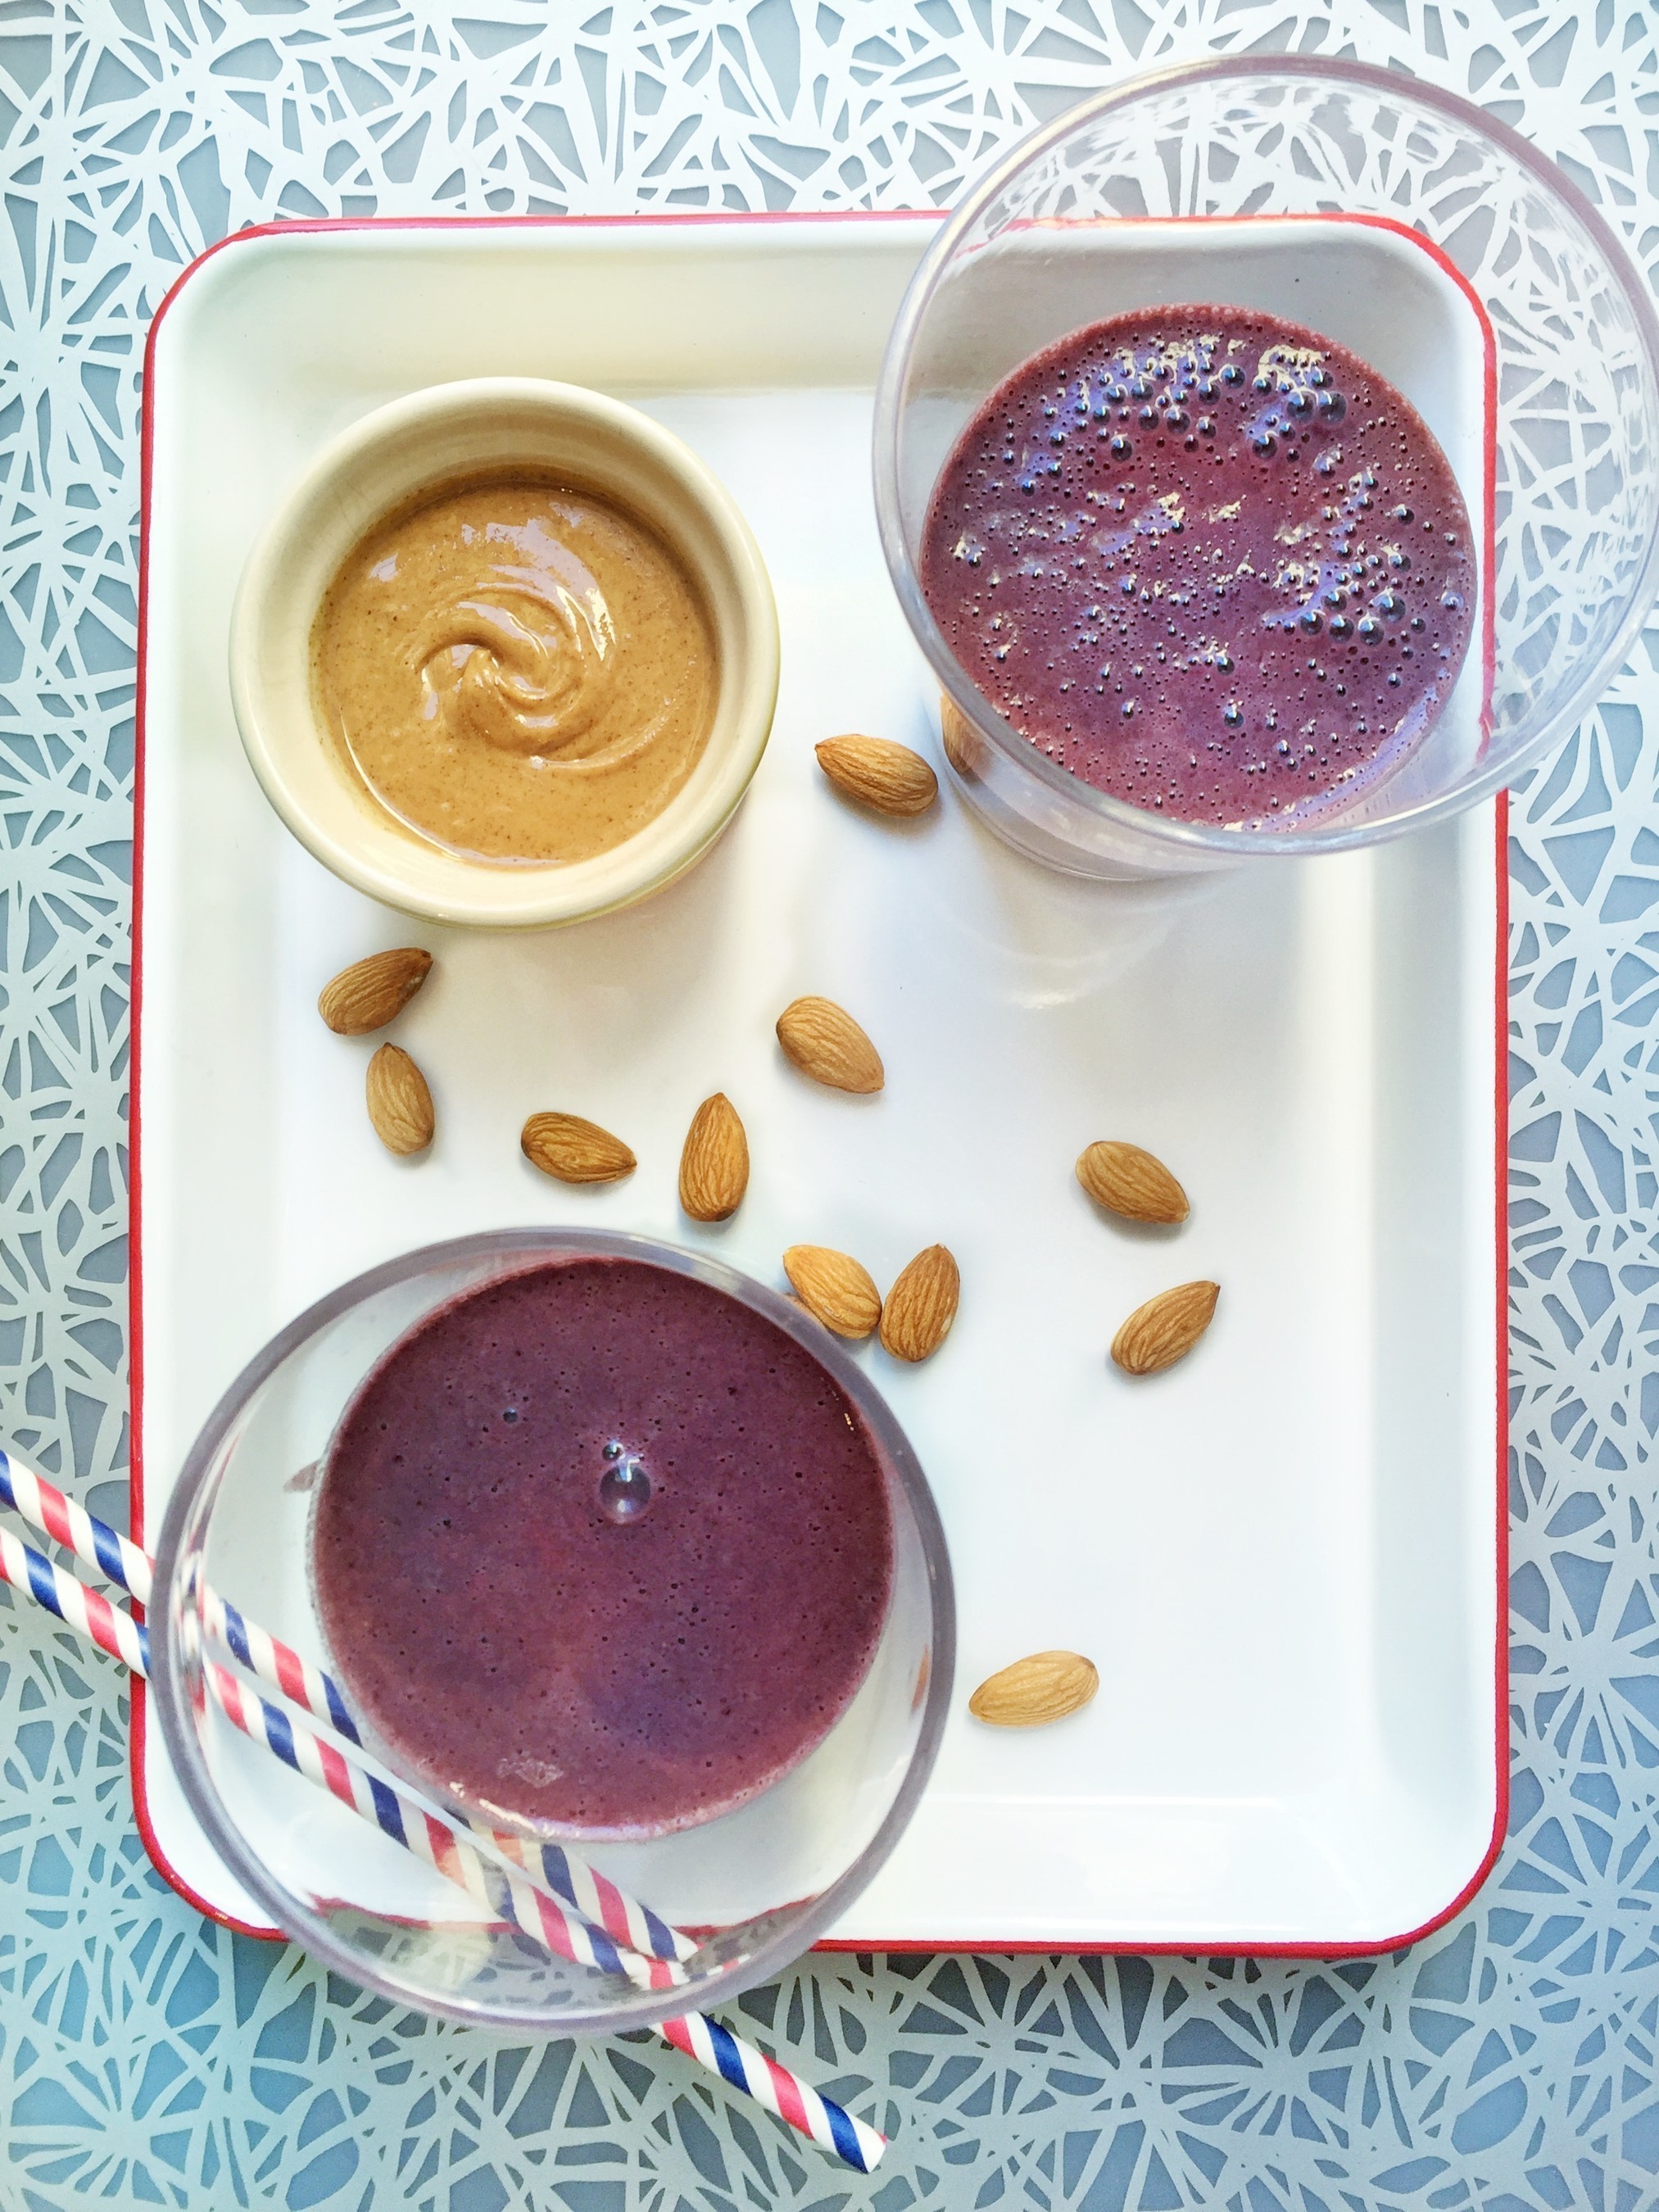 Cherry Almond Smoothie by Frances Largeman-Roth, RDN